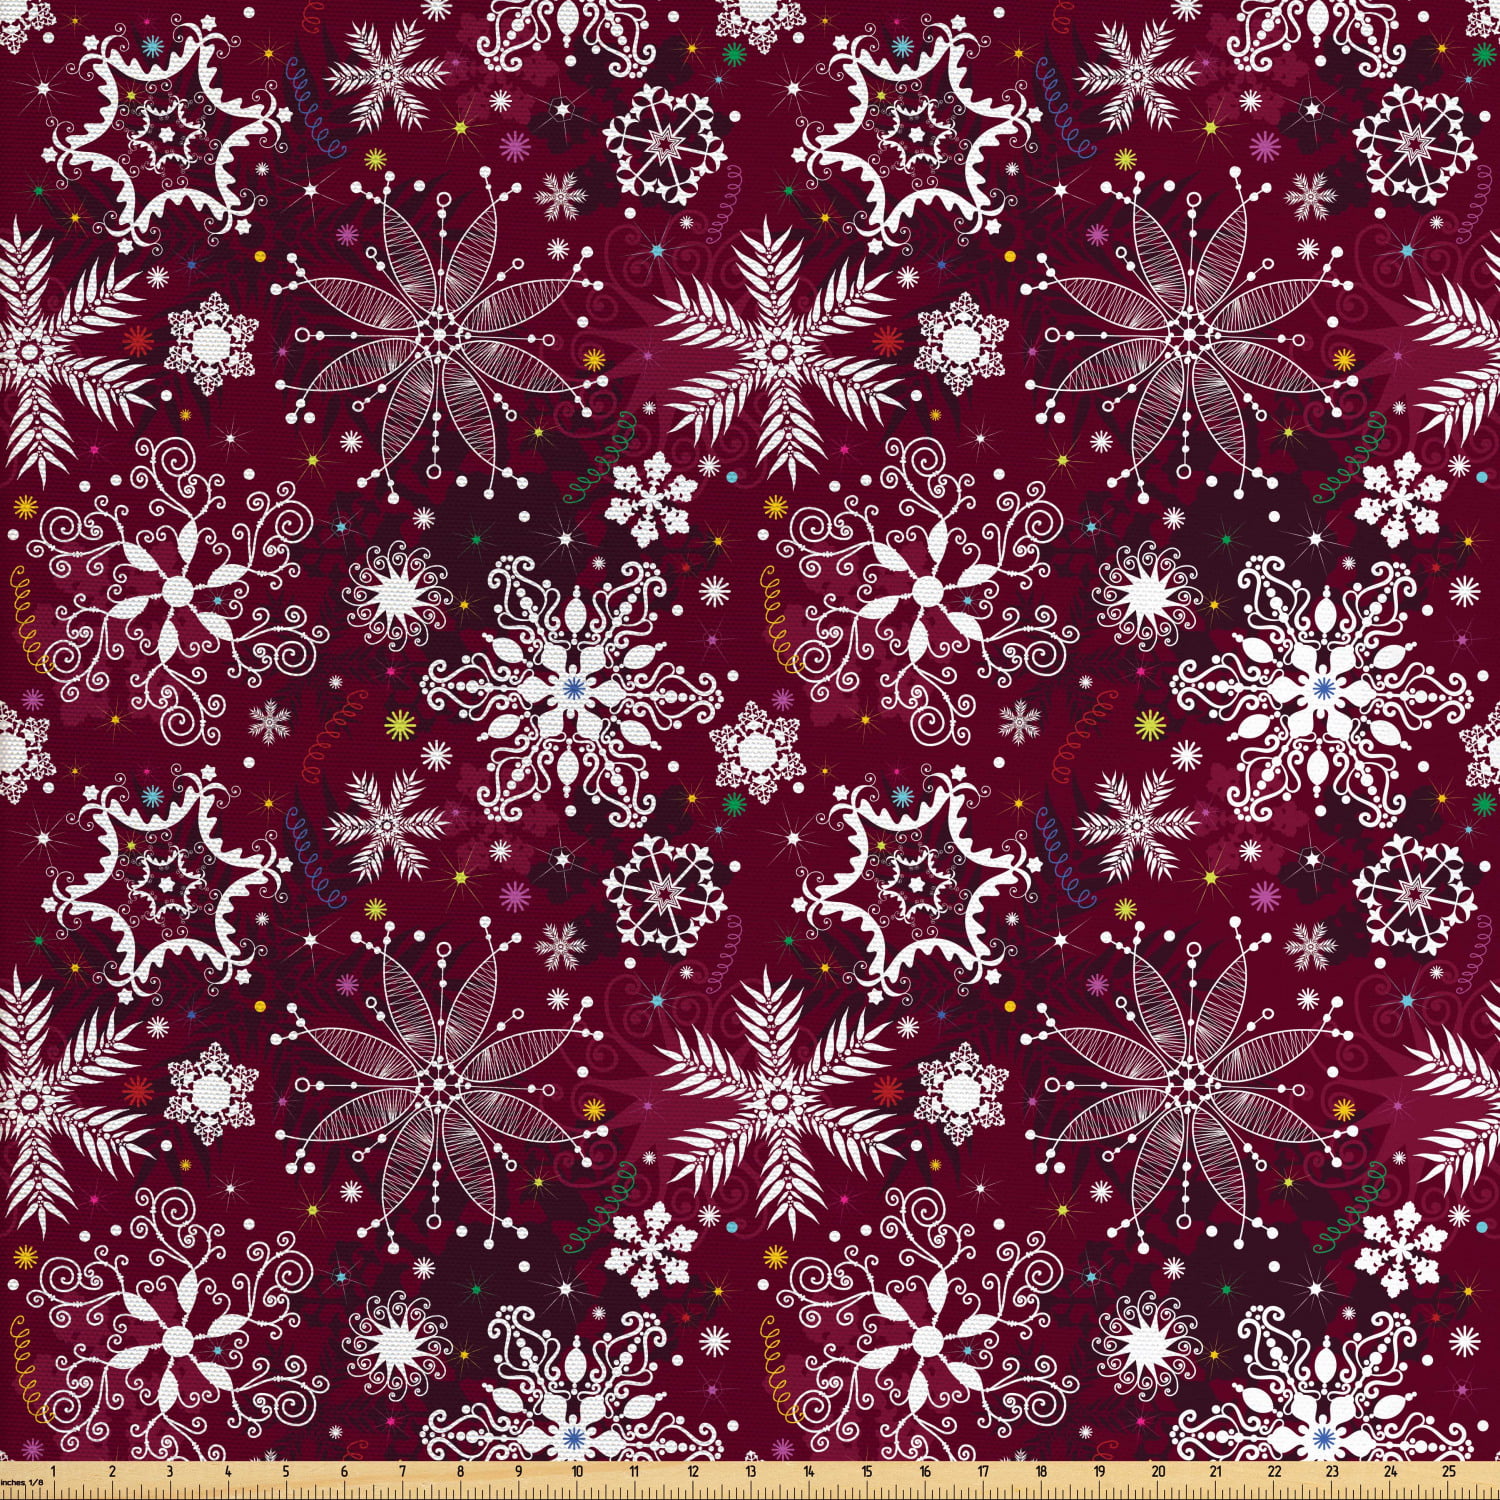 Winter Fabric by The Yard, Floral Flakes with Colorful Swirls Dots and ...